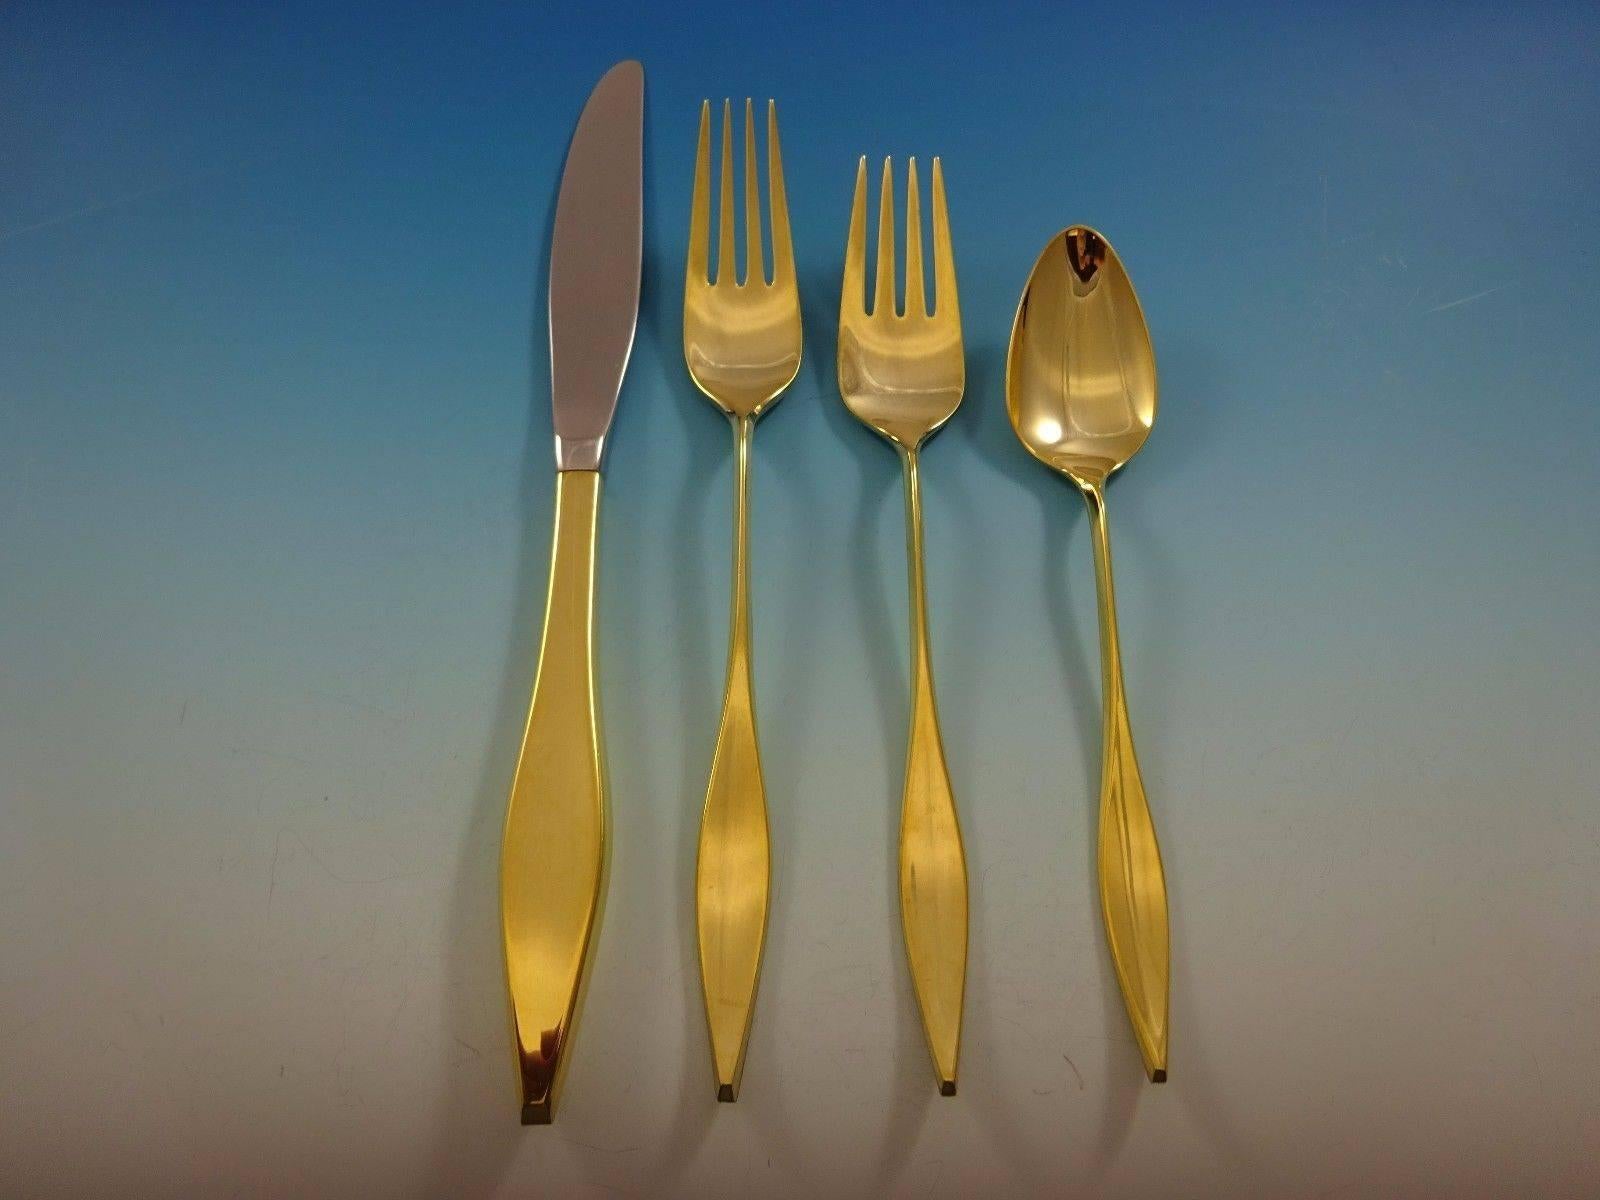 Lark gold by Reed & Barton sterling silver flatware set - 48 pieces. This set is vermeil (completely gold-washed) and includes: 

12 Knives, 9